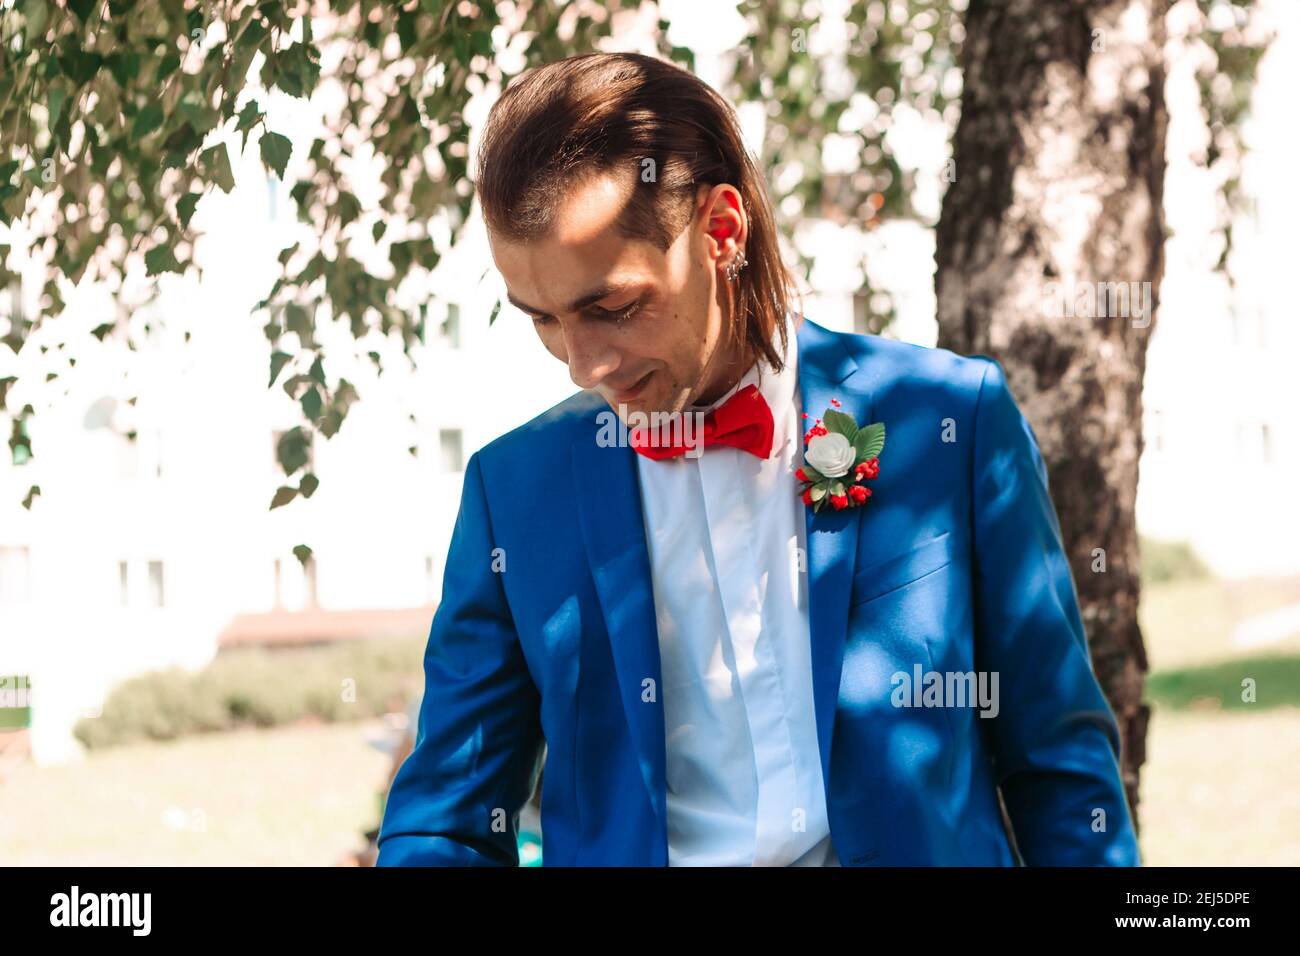 Portrait Of Young Handsome Man In Blue Suit With Red Bow Tie. Wedding  Concept Stock Photo - Alamy